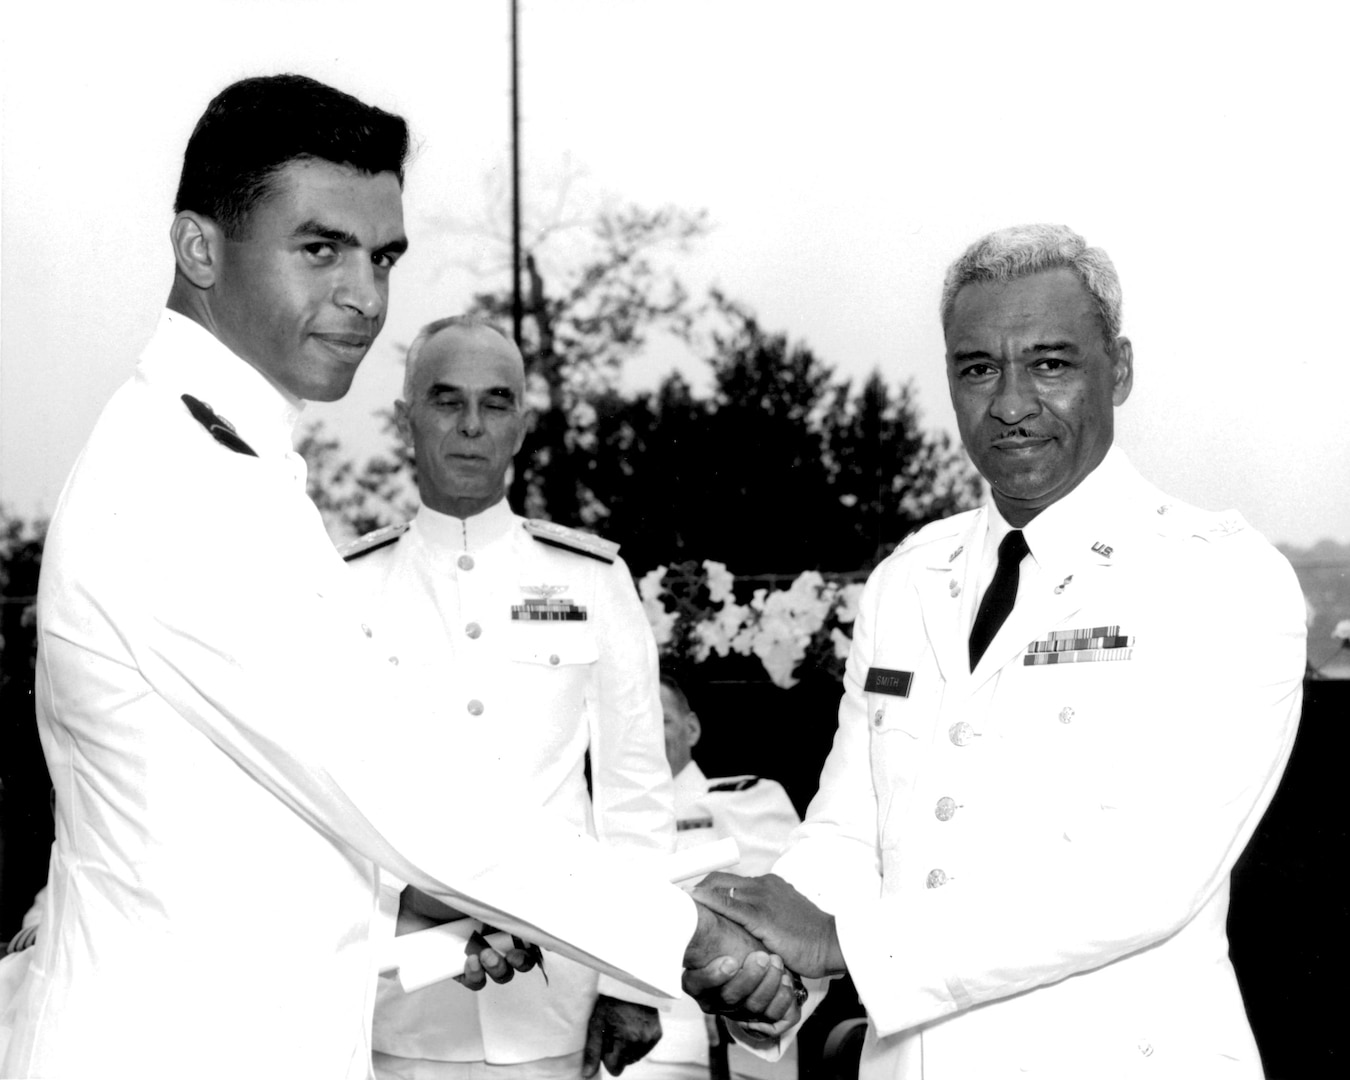 Merle Smith, a 1966 Coast Guard Academy graduate, was the first African-American graduate of the academy. He went on to become a distinguished combat officer in Vietnam, earning the Bronze Star Medal. (U.S. Coast Guard)